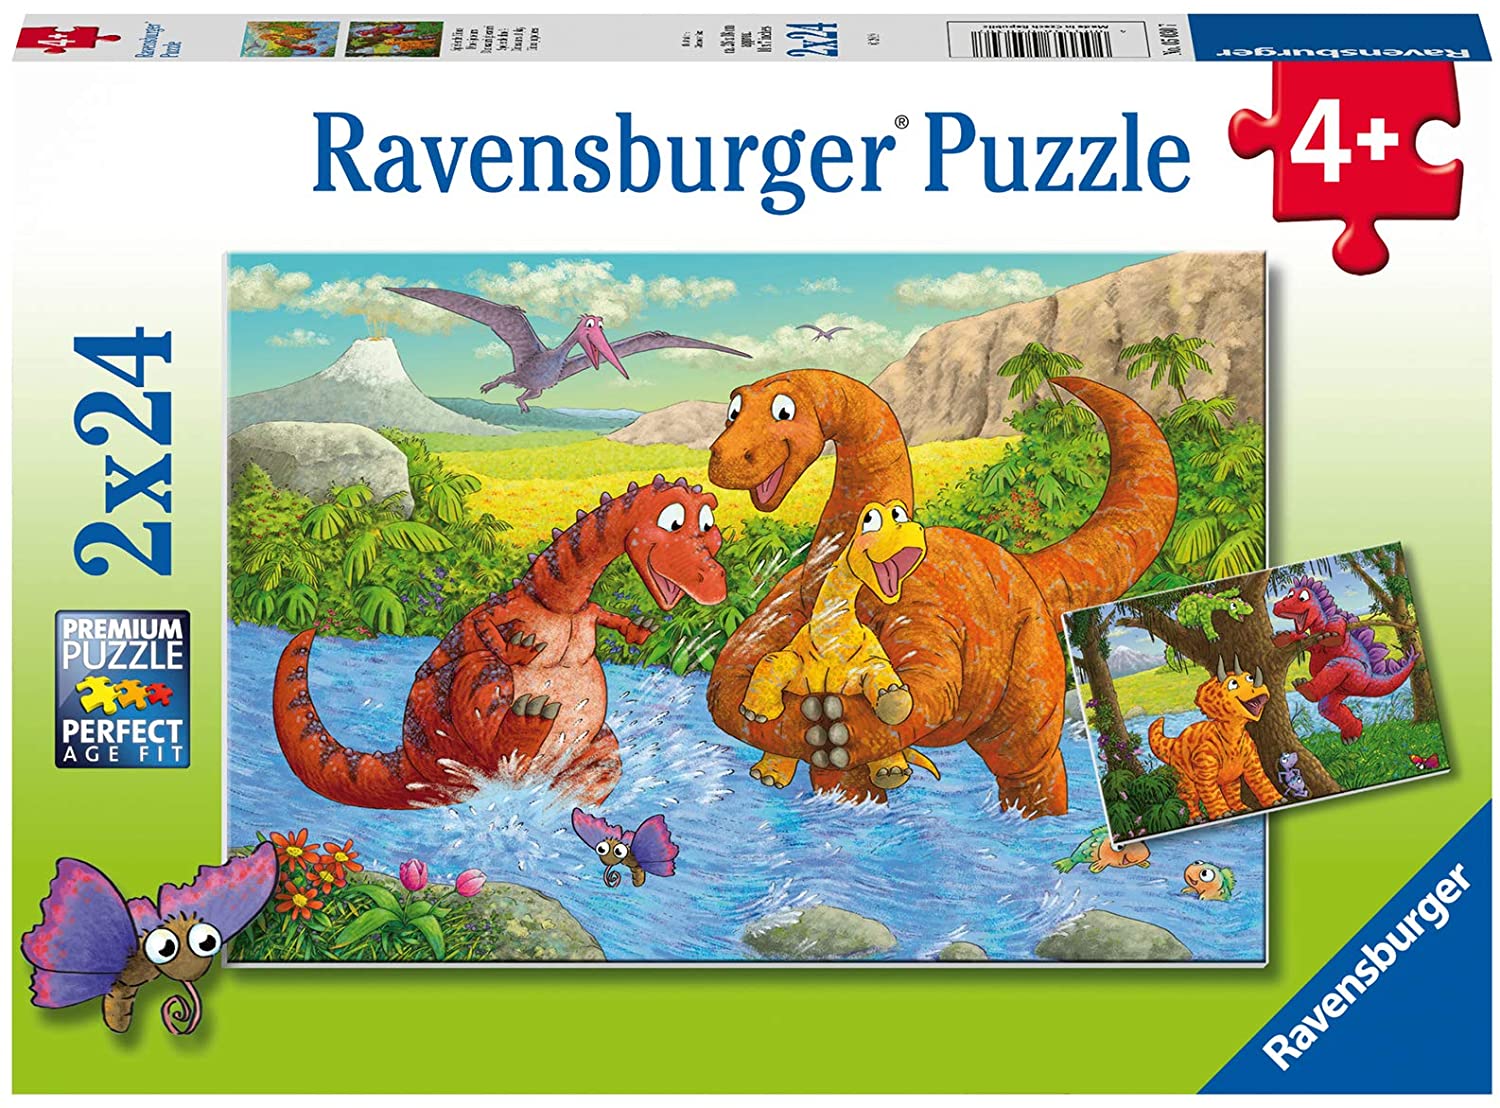 Dinosaurs at Play 2 x 24 pc Puzzle